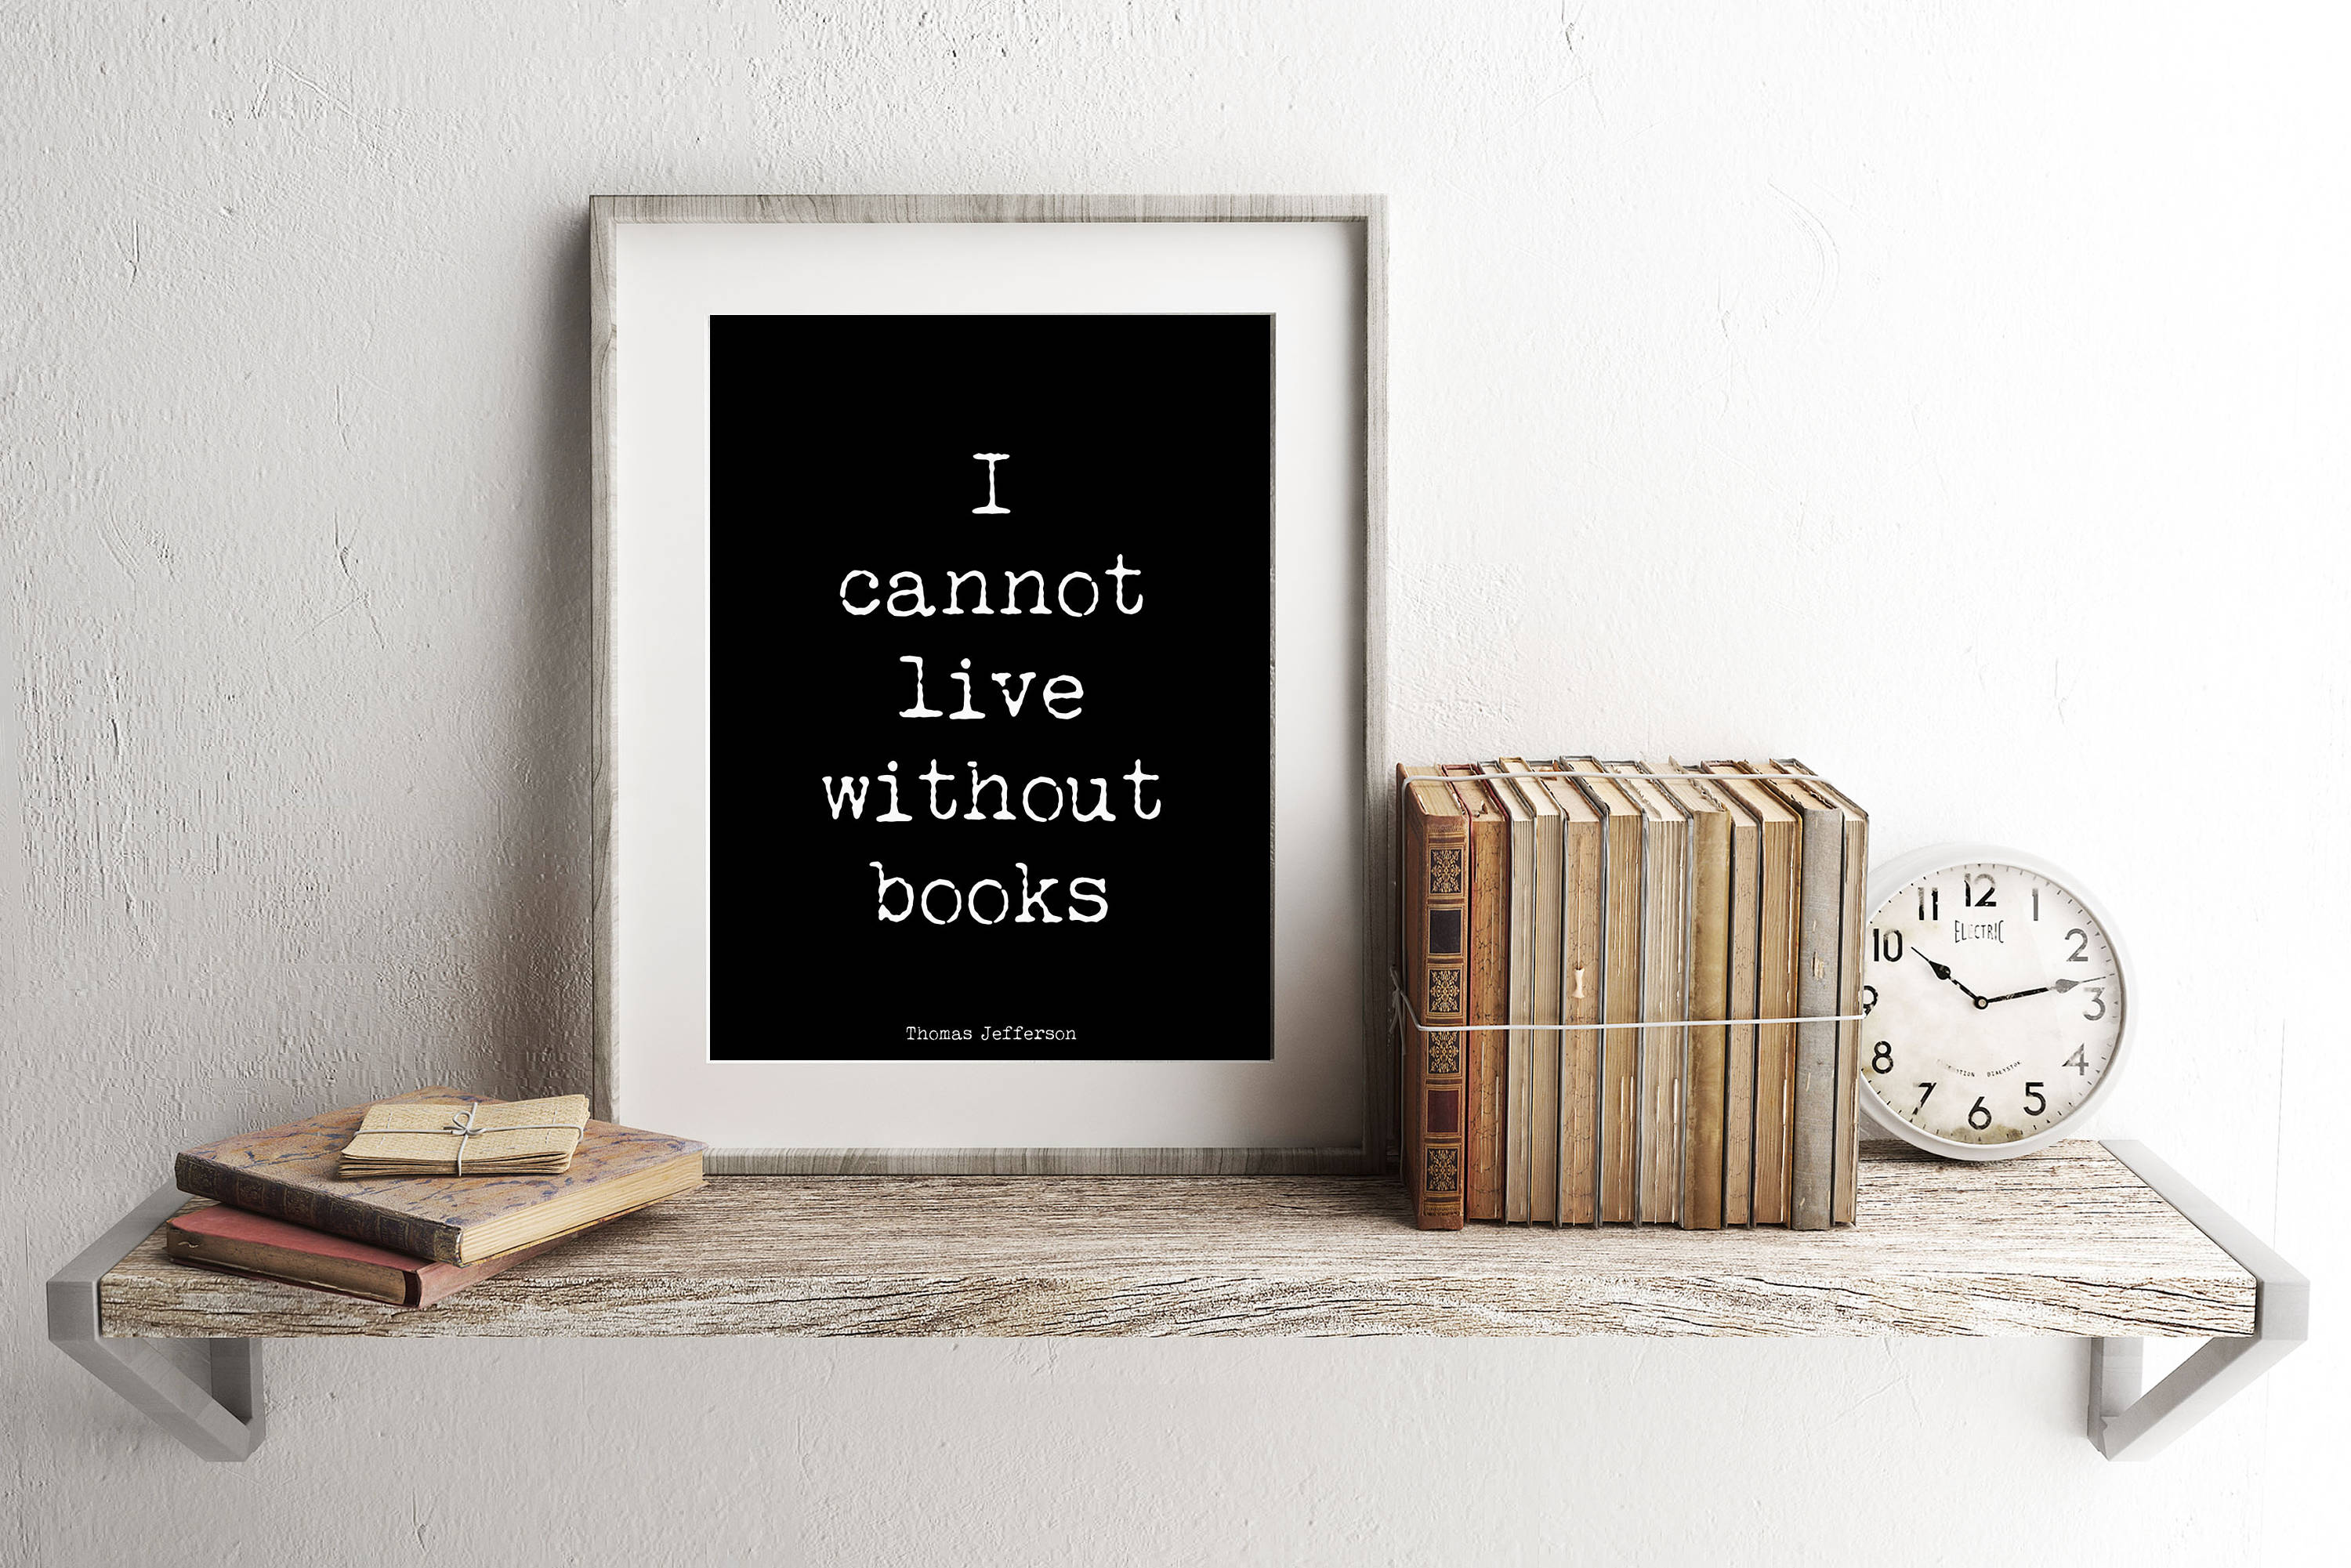 Thomas Jefferson Quote Book Reading Print, unframed black & white art, library decor, read books print, I cannot live without books - BookQuoteDecor